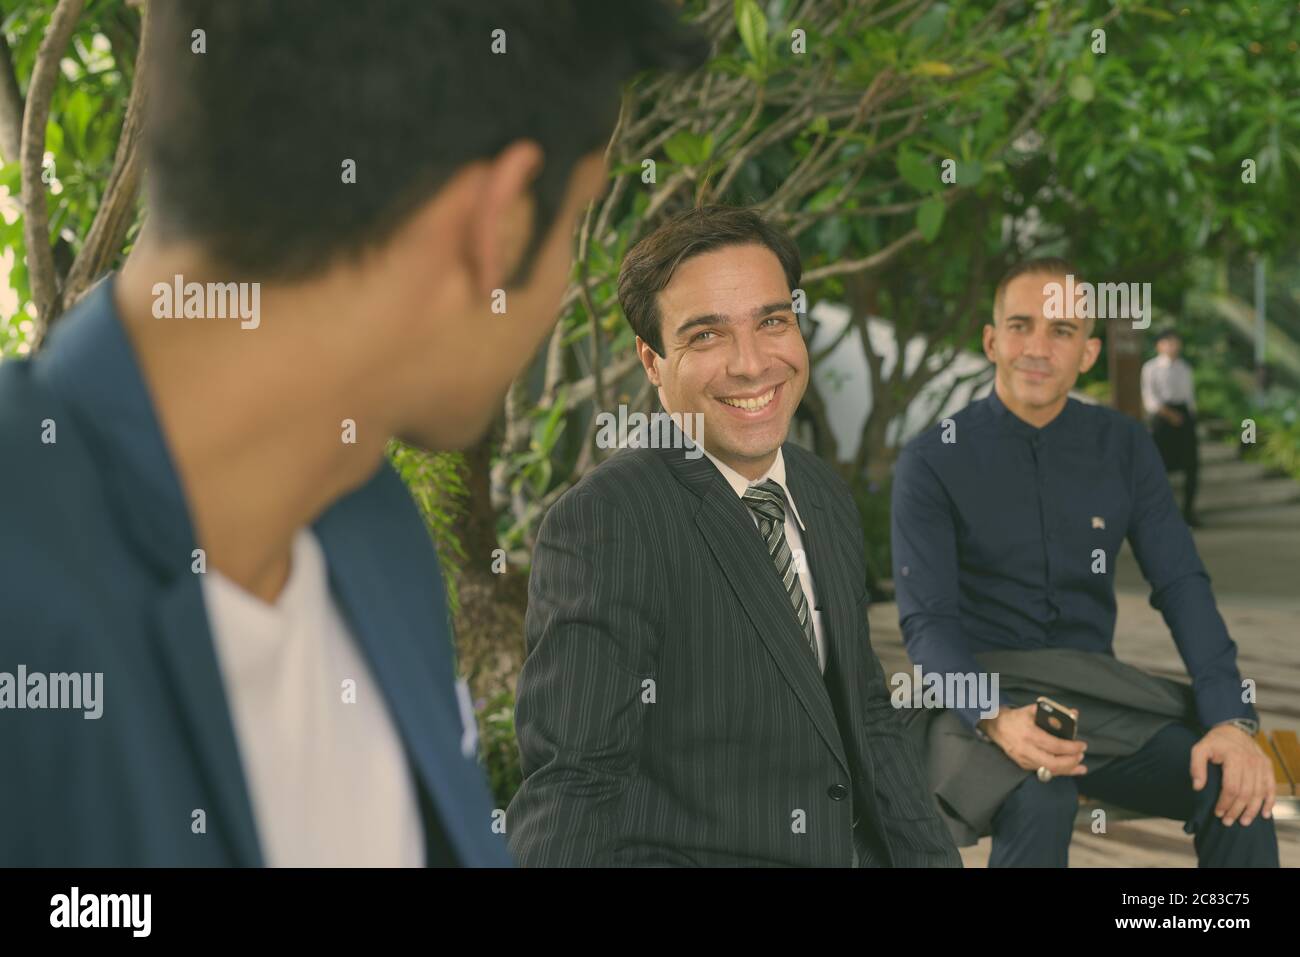 Portrait of Persian businessmen together at the park outdoors Stock Photo